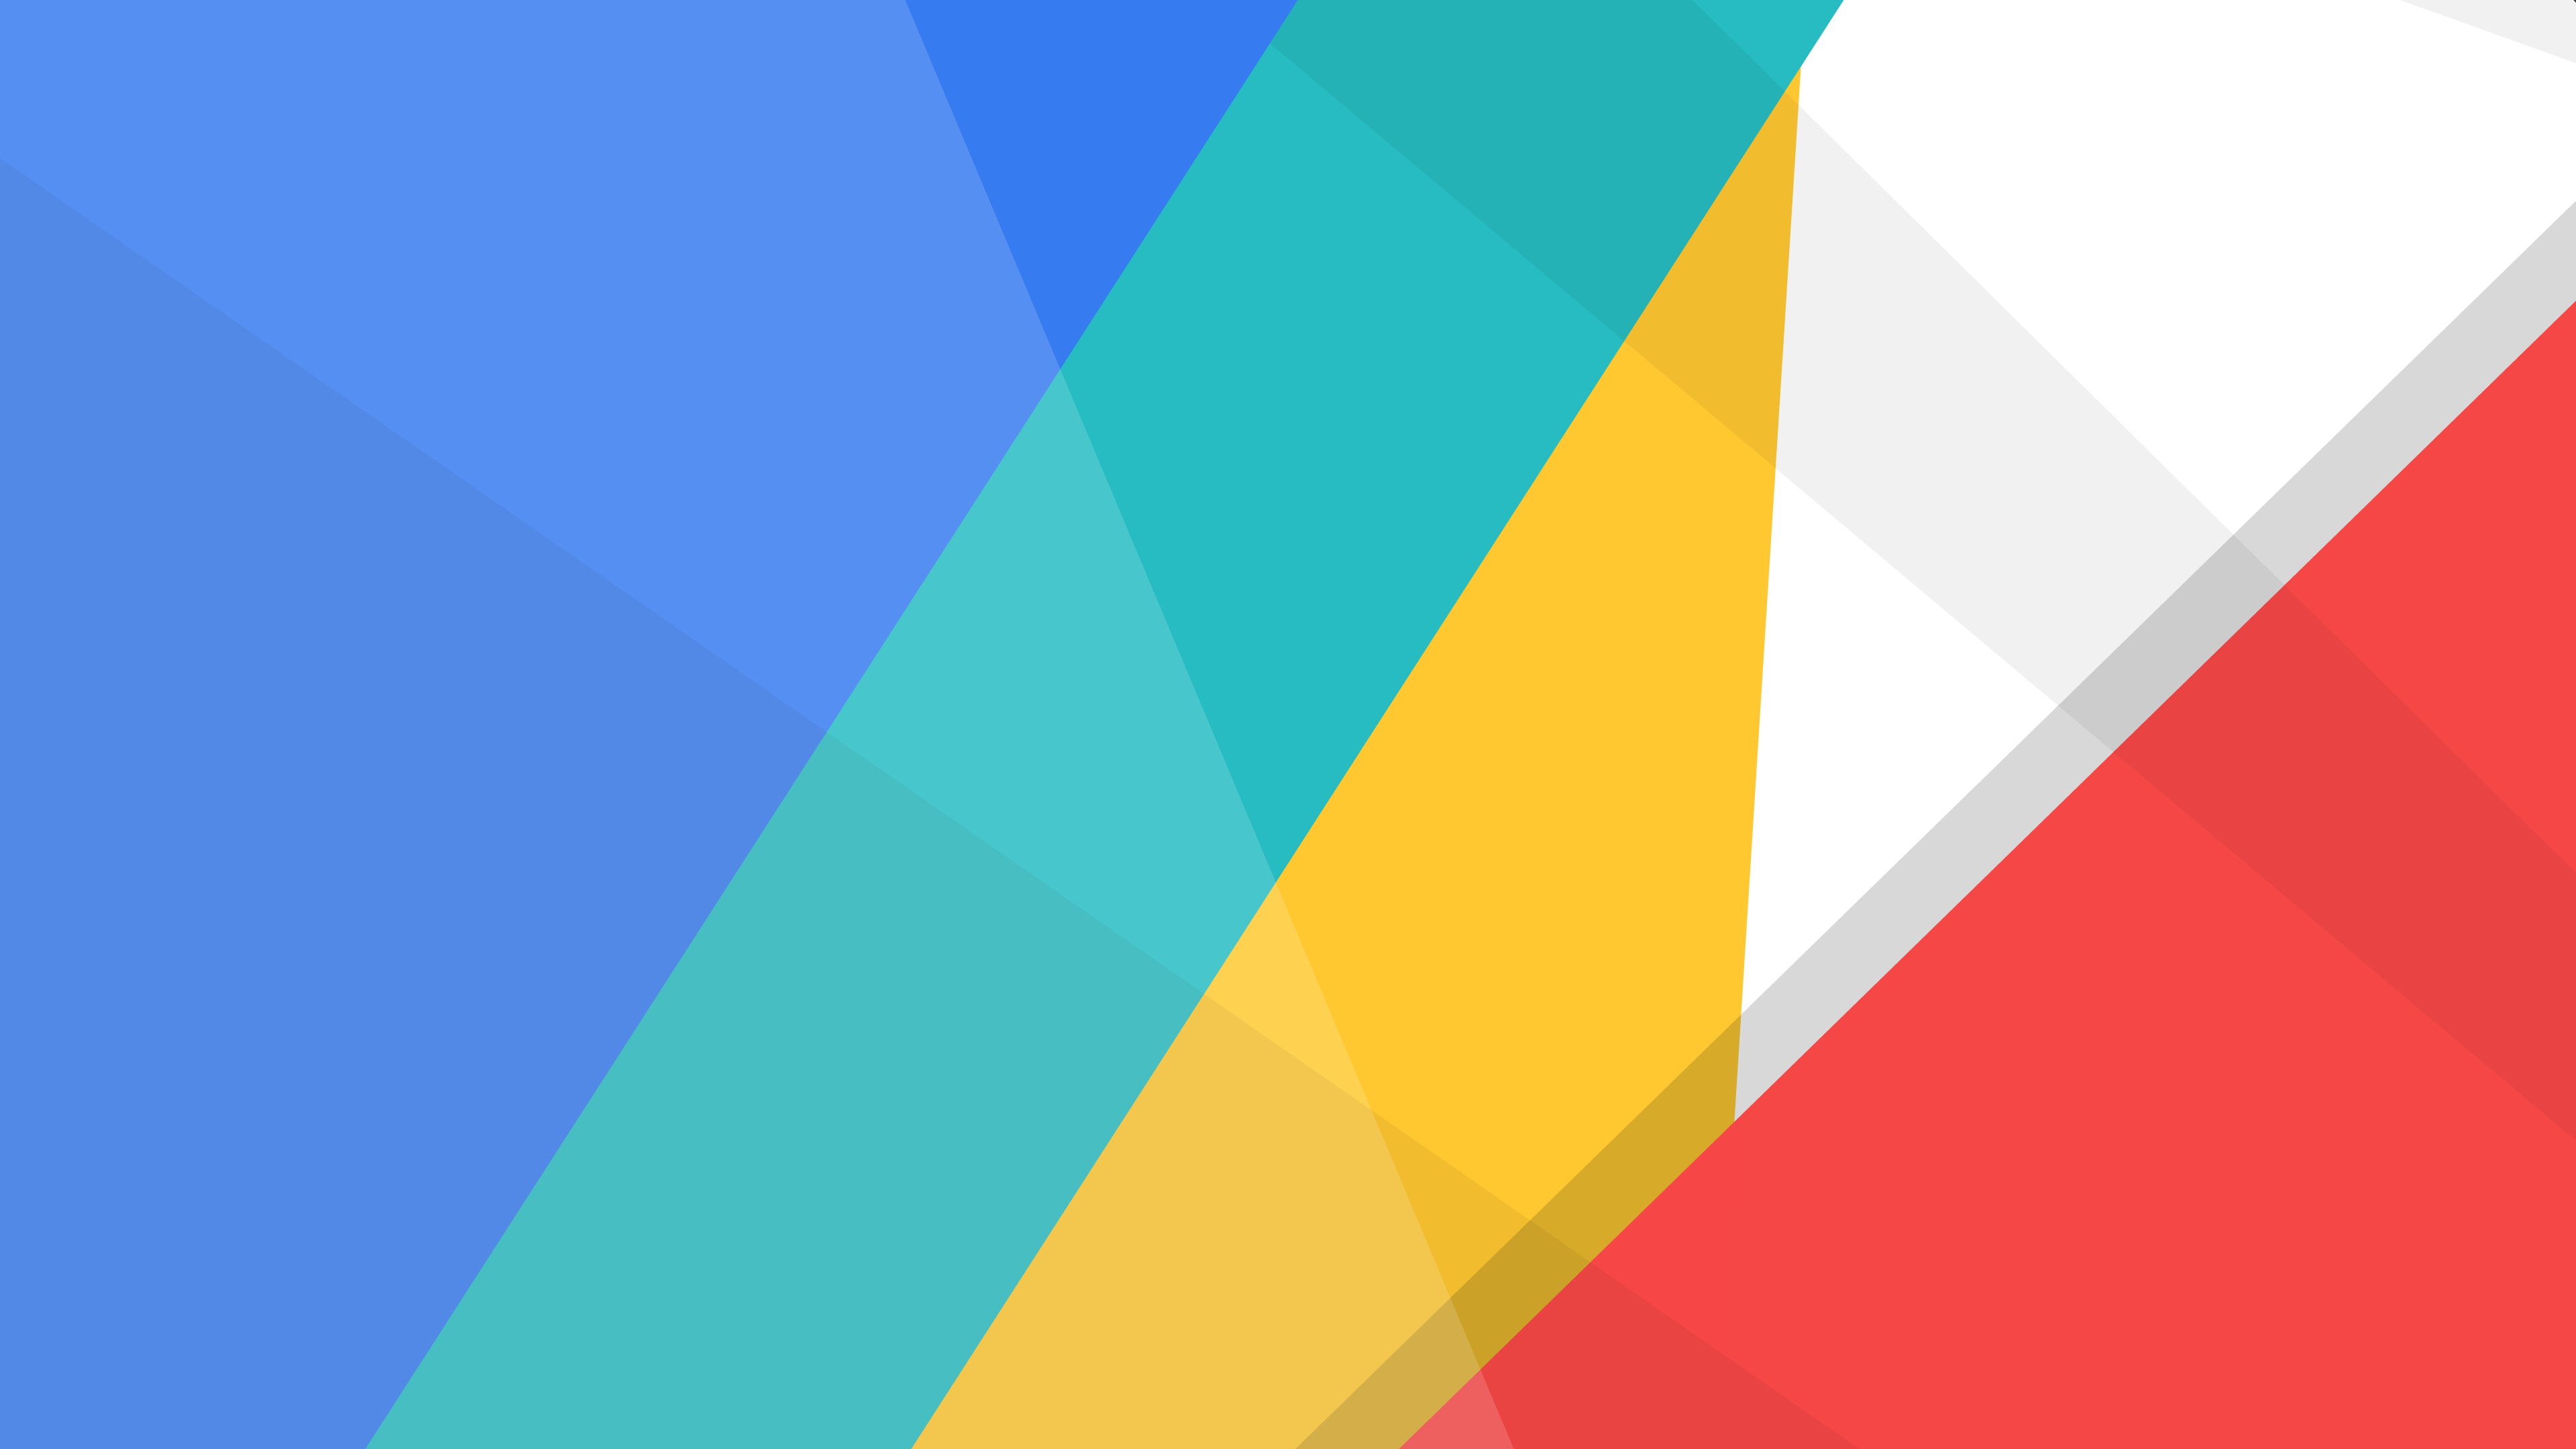 Material Style Android L Colorful Abstract Geometry 3840x2160